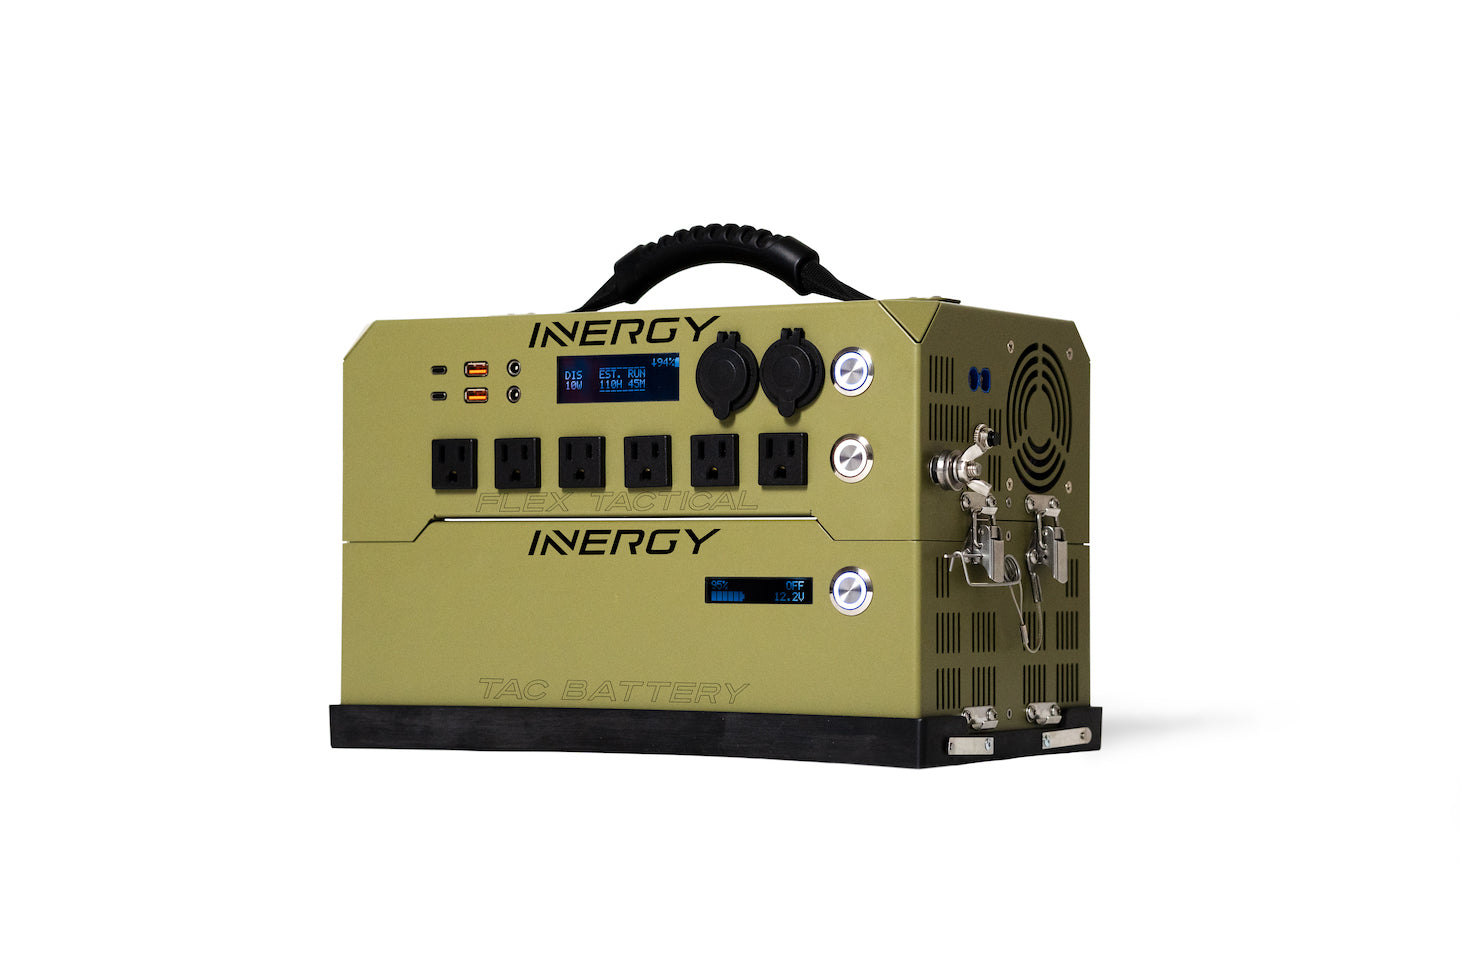 Flex Tactical 1500 Power Station - Inergy